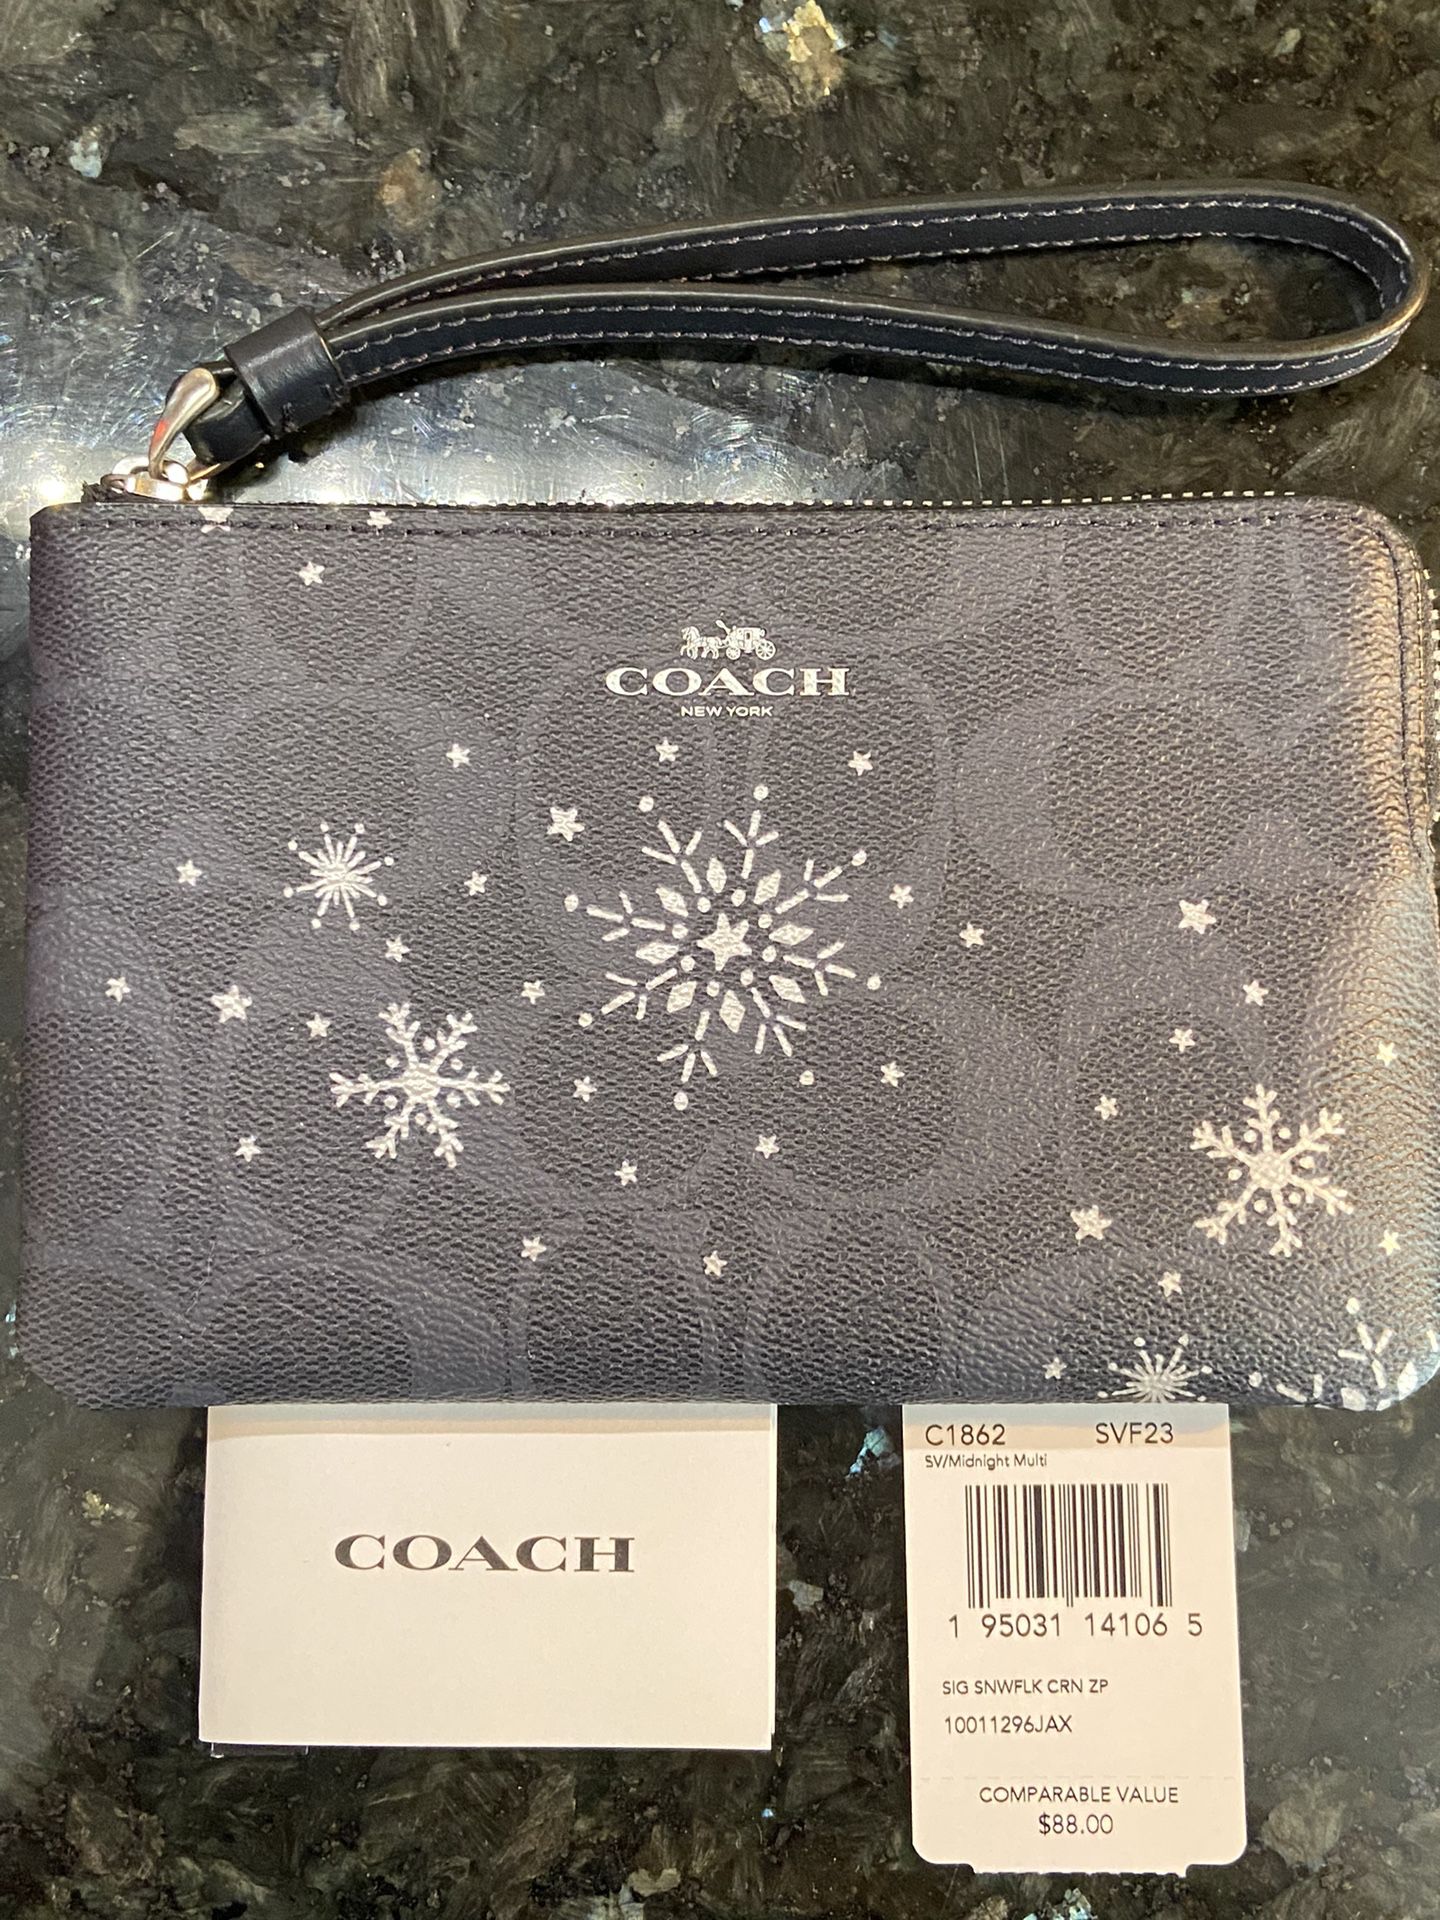 NEW Coach Wristlet. Zippered Top. Navy Blue/Silver Hardware. With Tags. Porch Pick Up In Dublin. 